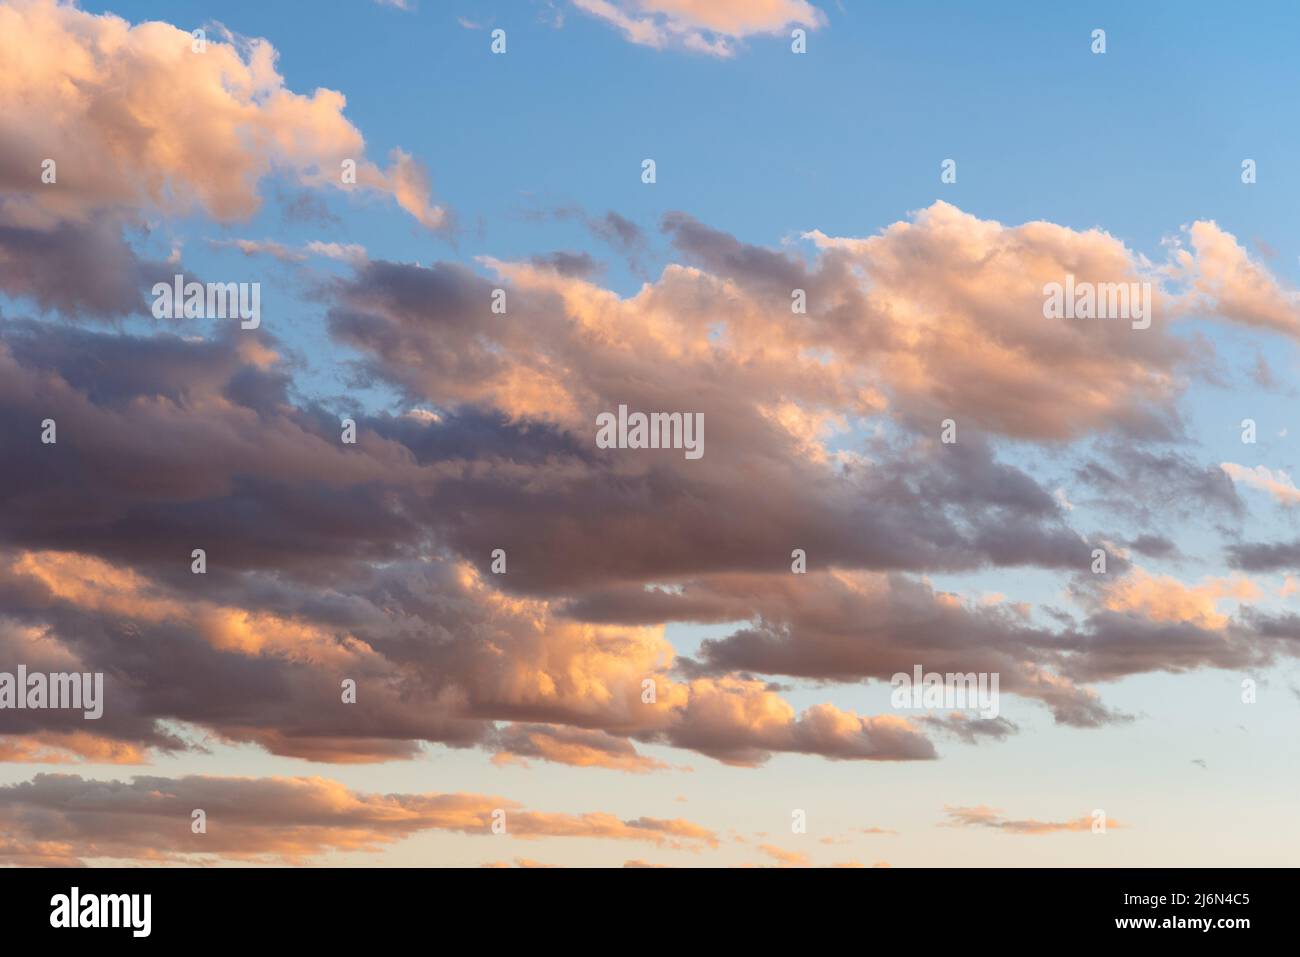 Fluffy purple clouds on blue sky at dramatic sunset. Stock Photo